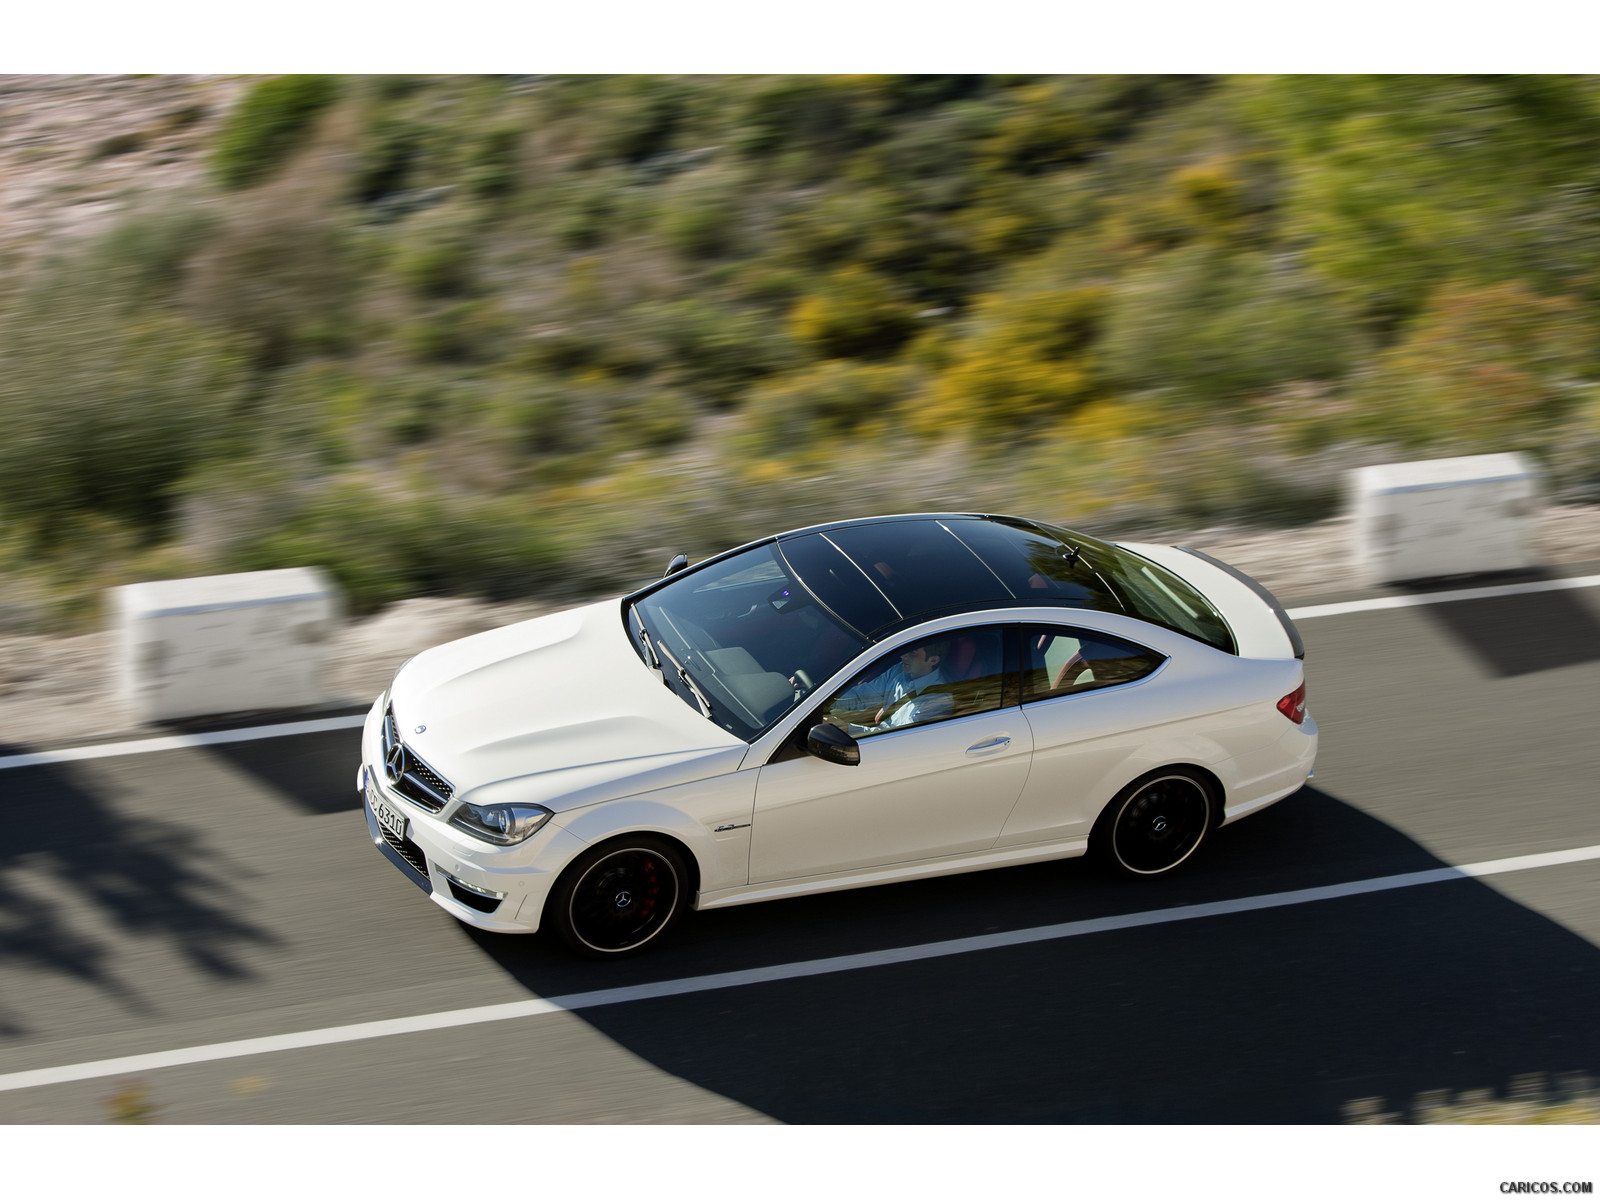 Mercedes-Benz C63 AMG Coupe (2012)  - Top, #52 of 64